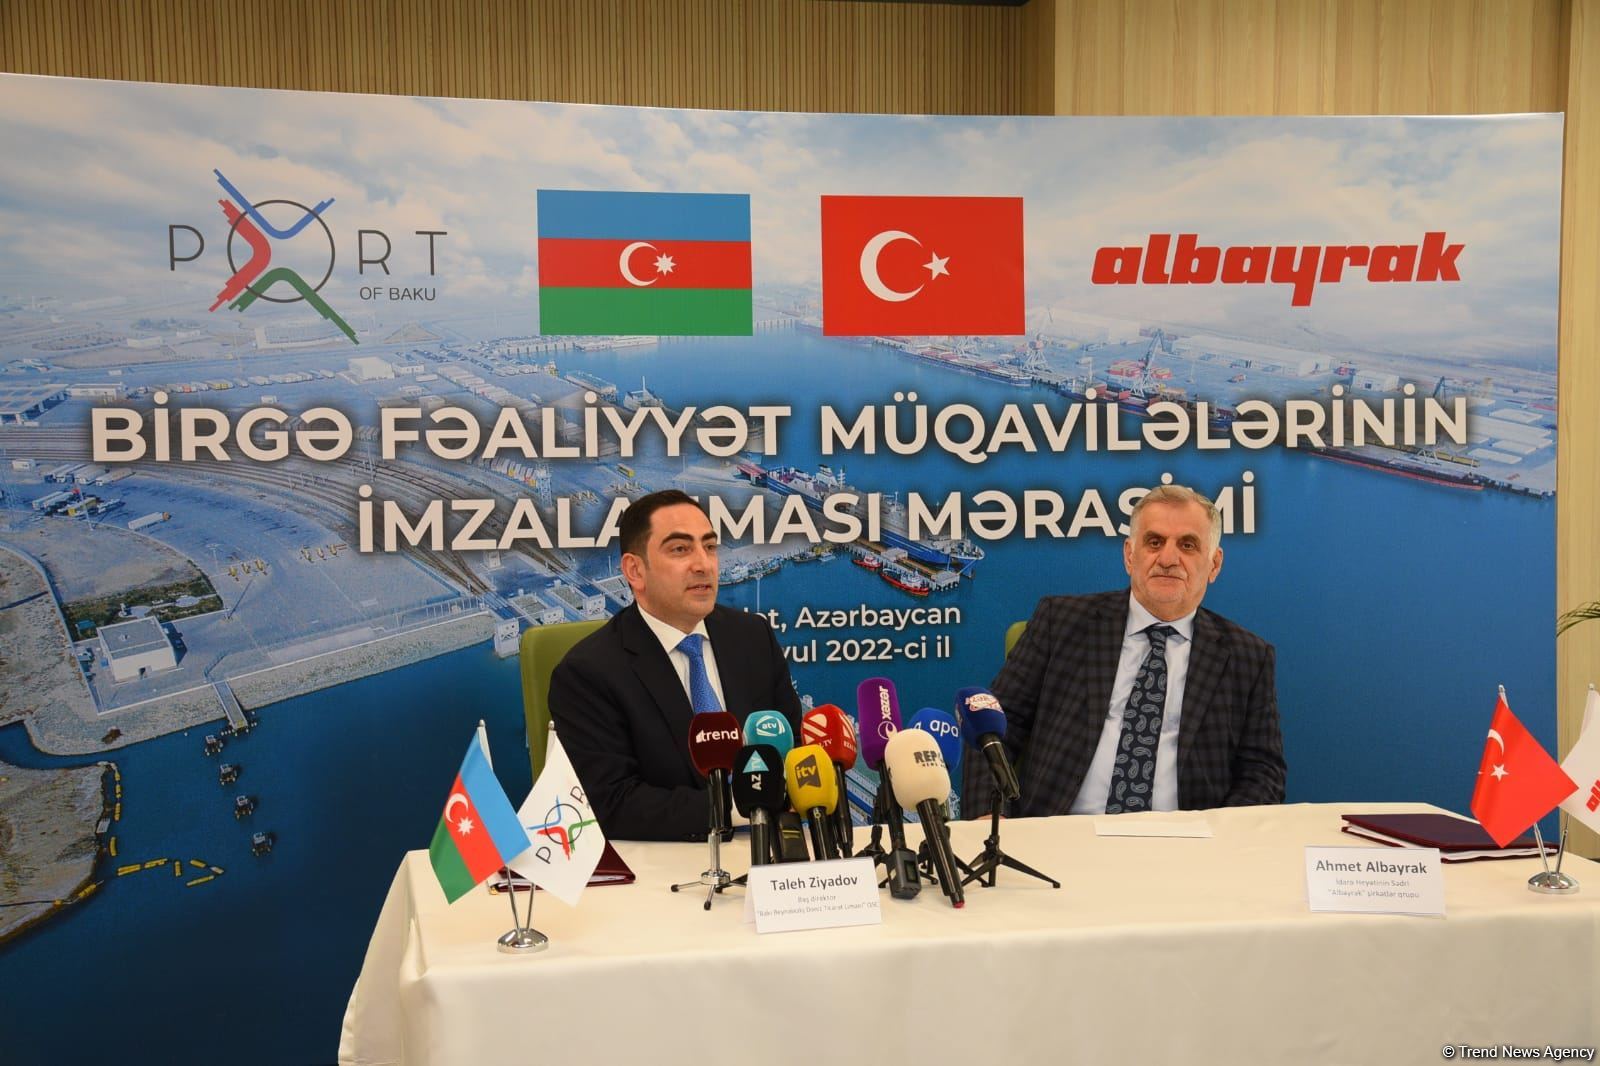 Port of Baku names planned time of commissioning Ro-Ro terminal